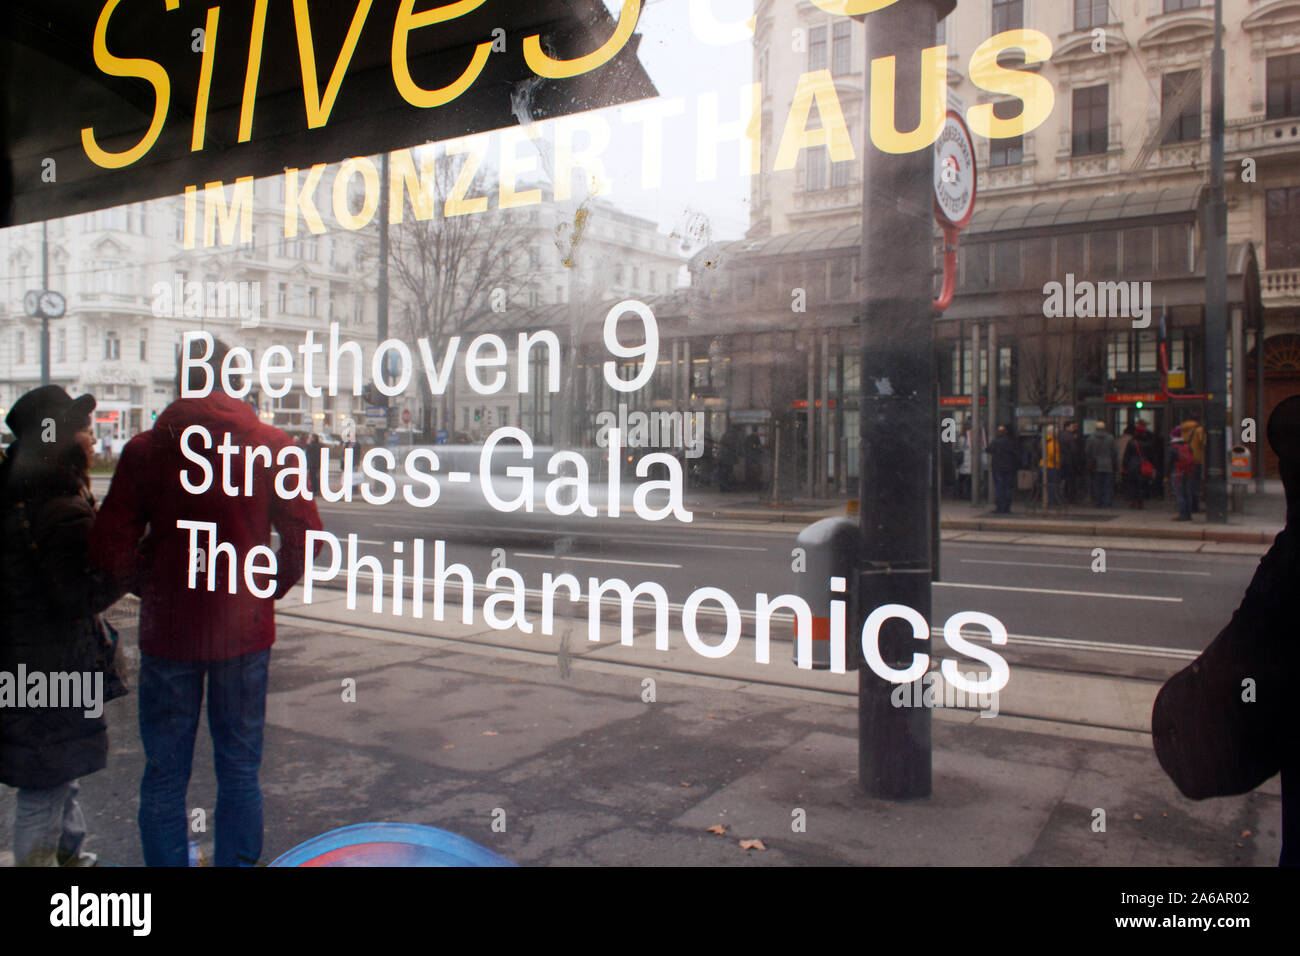 Advert for musical concert on busstop shelter in Vienna, Austria Stock Photo